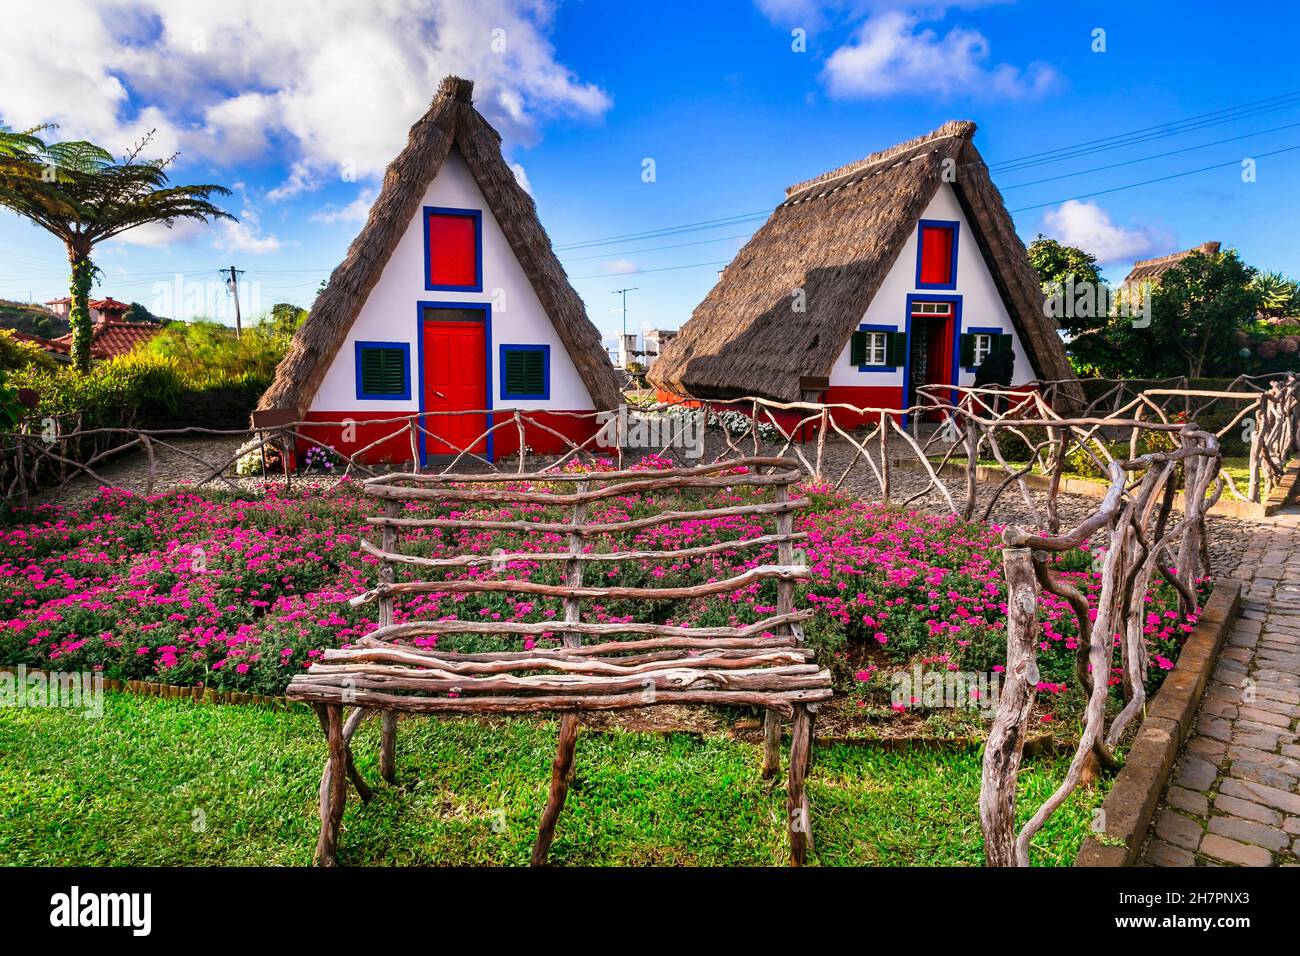 Madeira island travel and landmarks. Charming traditional colorful houses with thatched roofs in Santana town, popular tourist attraction in Portugal Stock Photo